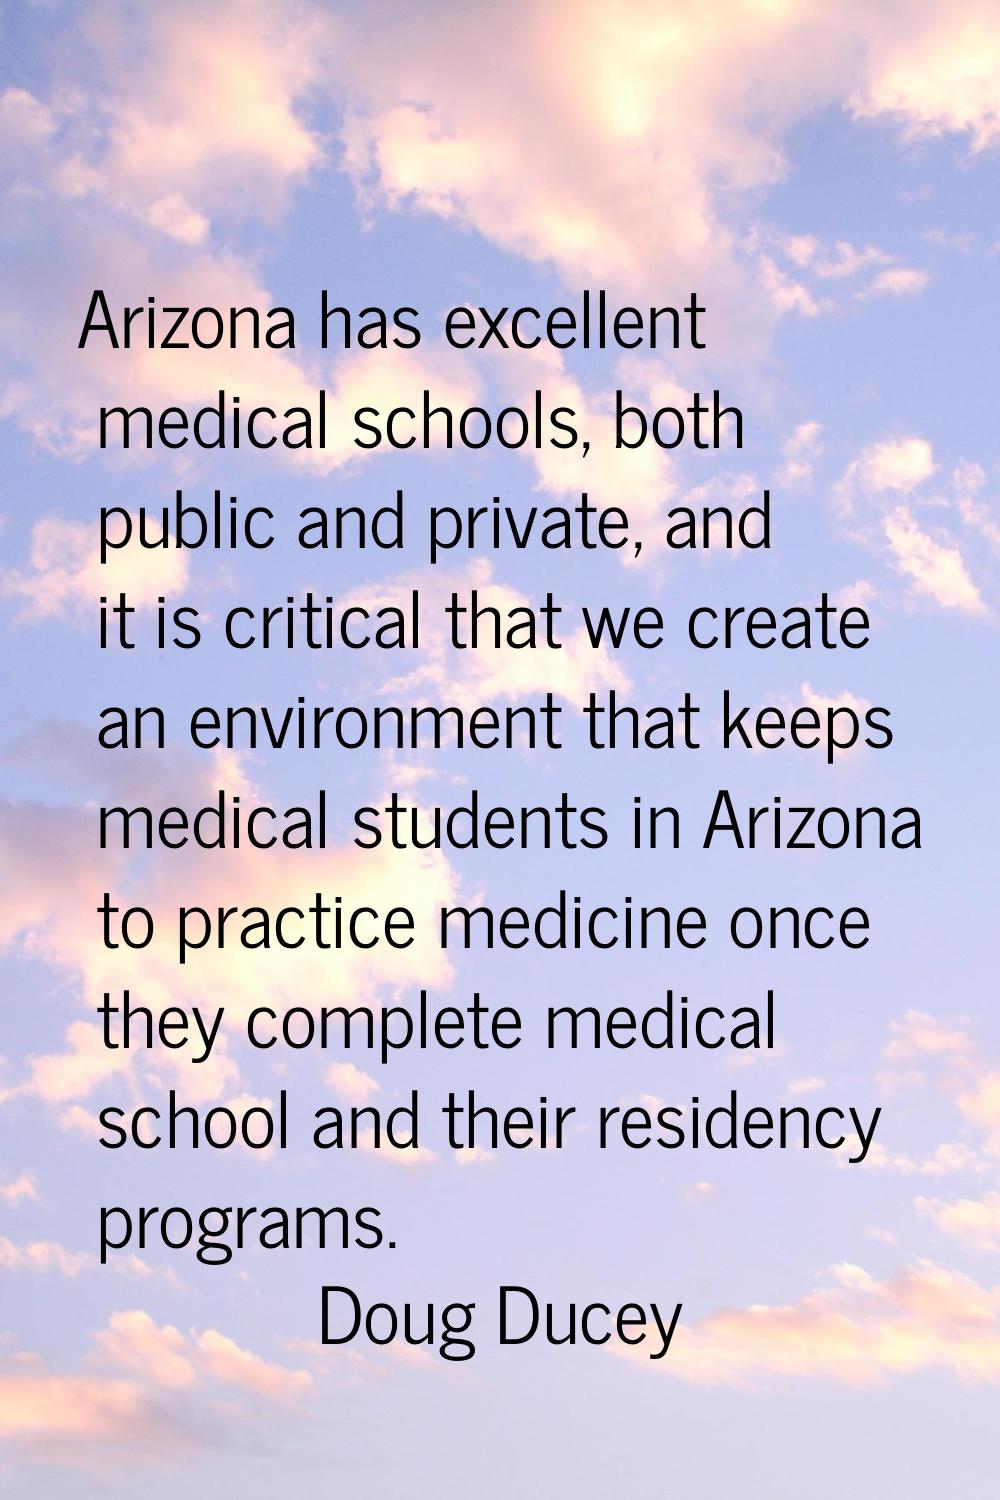 Arizona has excellent medical schools, both public and private, and it is critical that we create a